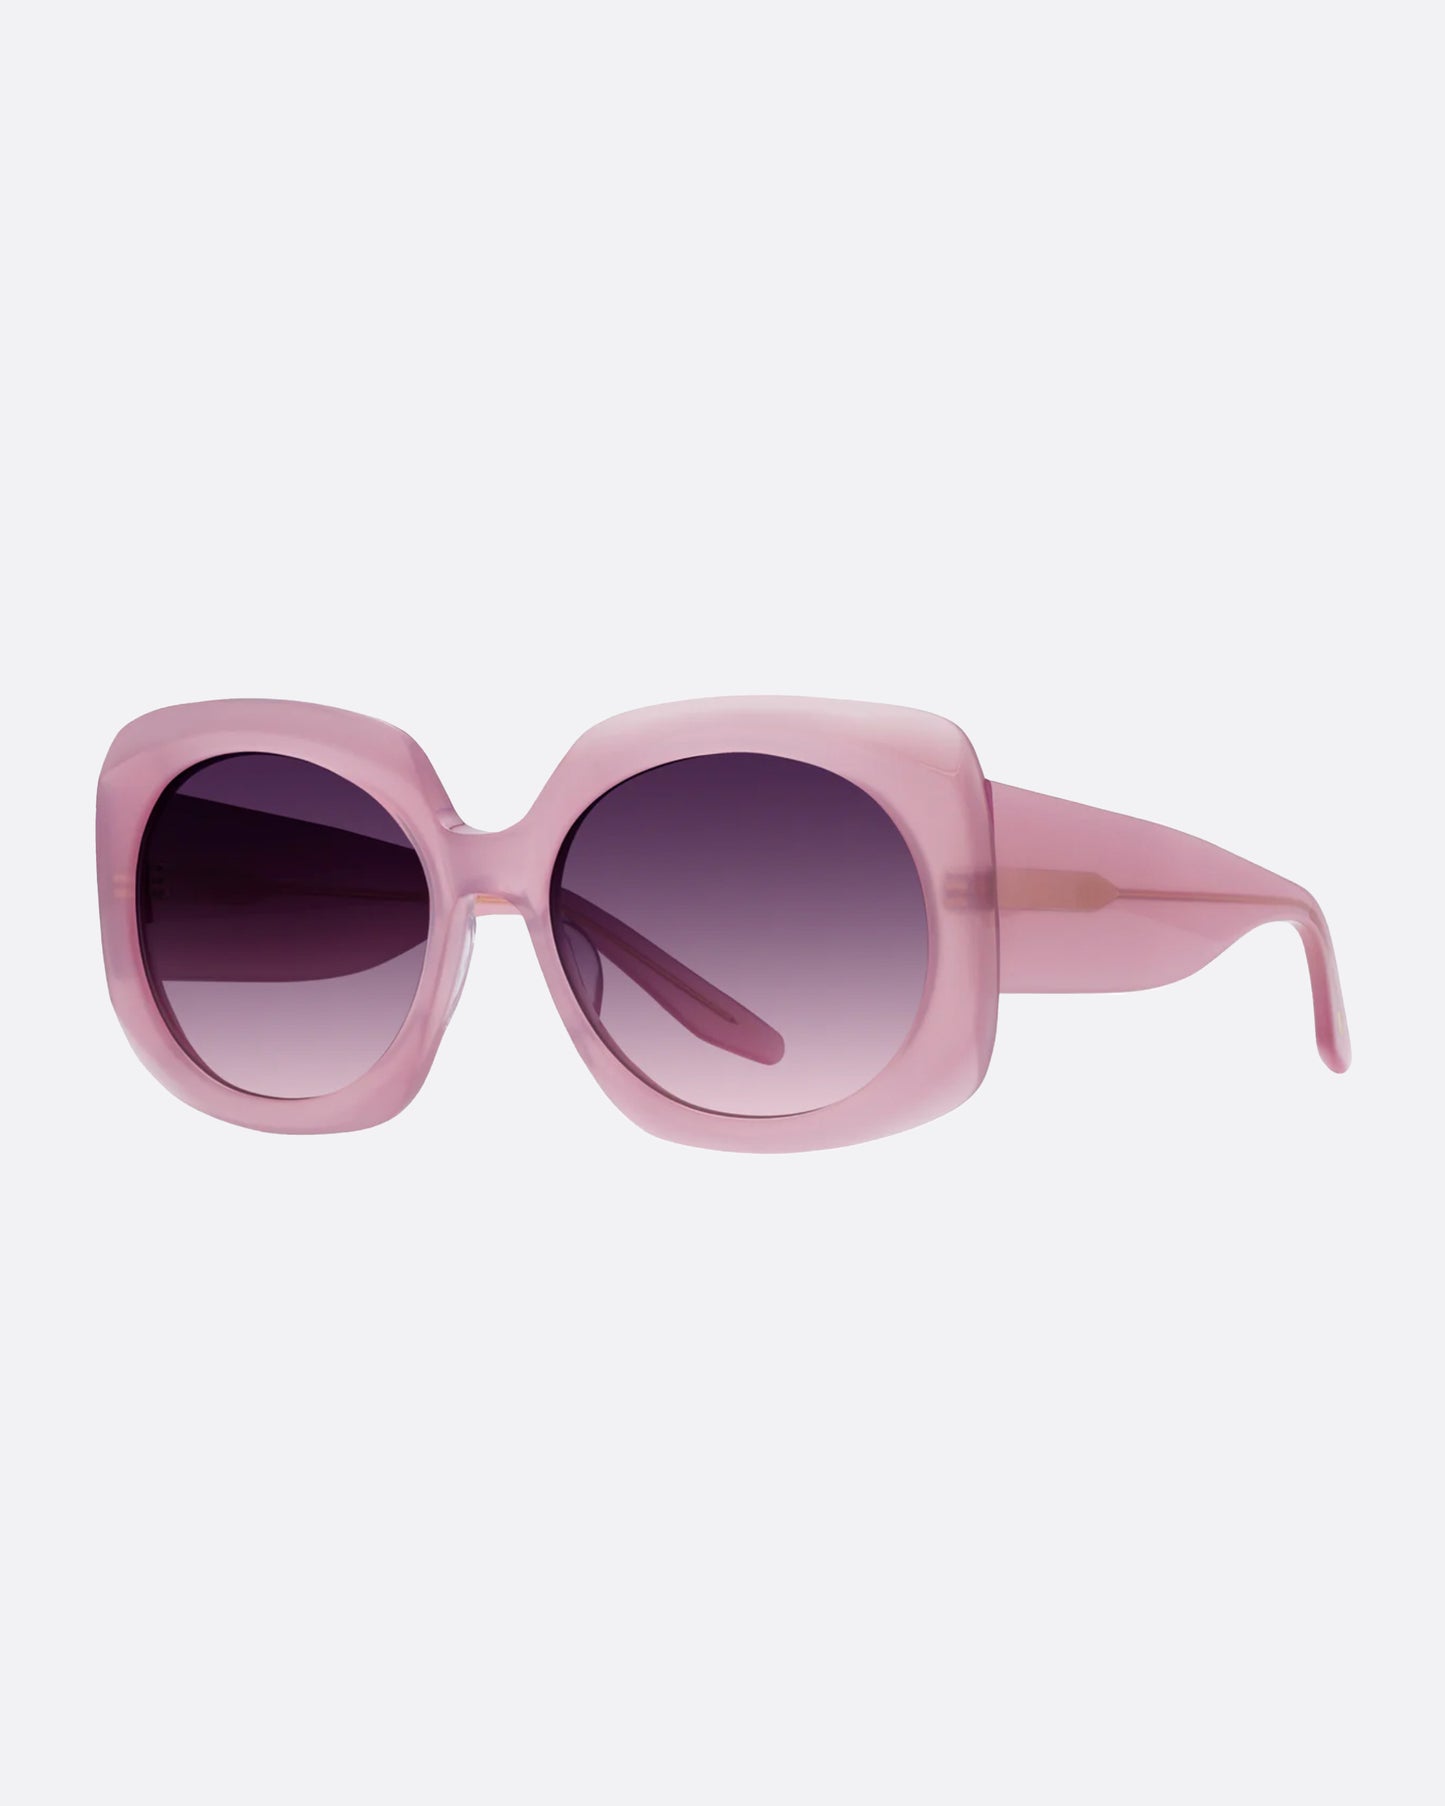 A pair of substantial frames with chic curves in a semi-transparent magnolia pink with gradient lenses.